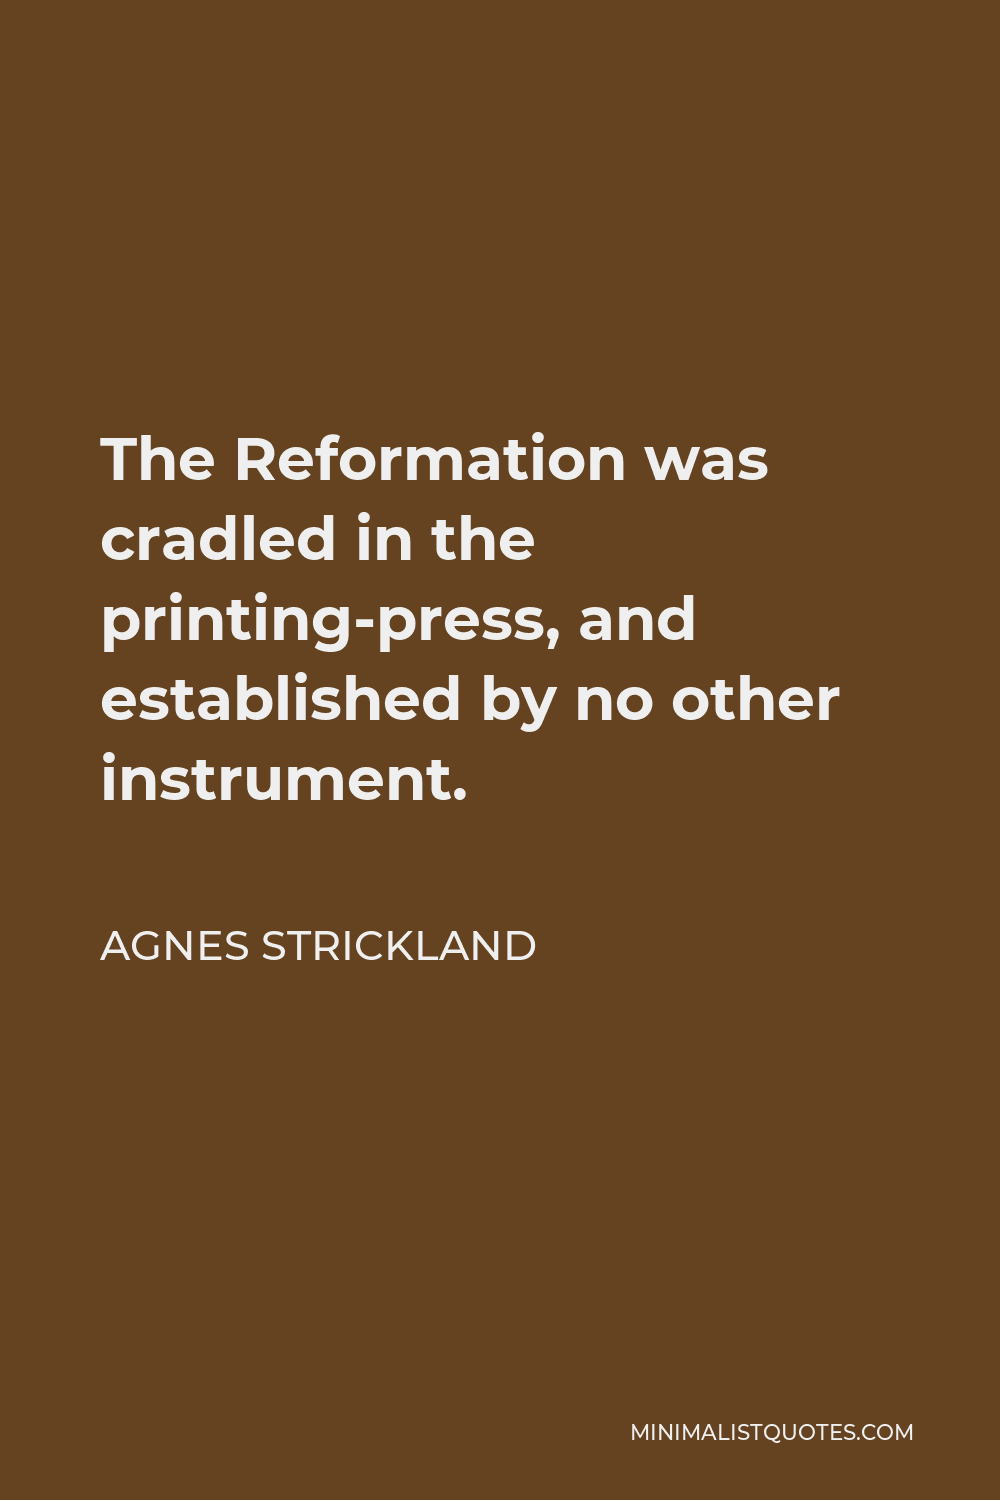 Agnes Strickland Quote - The Reformation was cradled in the printing-press, and established by no other instrument.